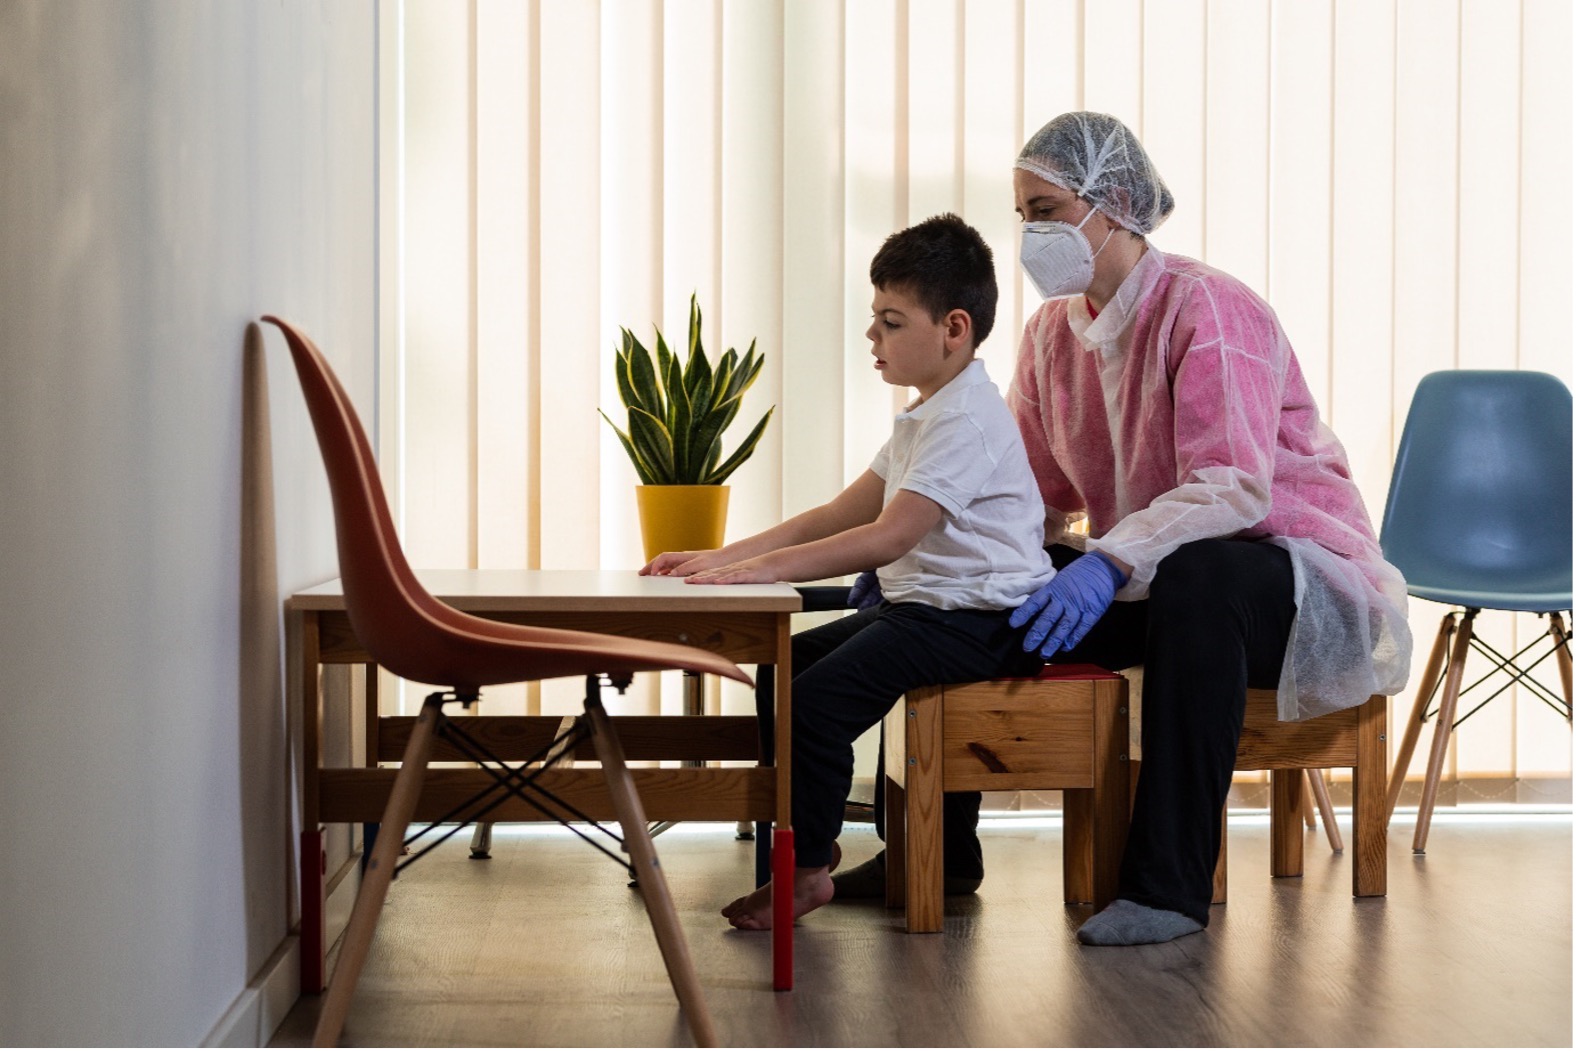 Woman wearing personal protective equipment conducting a paediatric physiotherapy assessment on a boy with disability sitting on a stool at a table.  